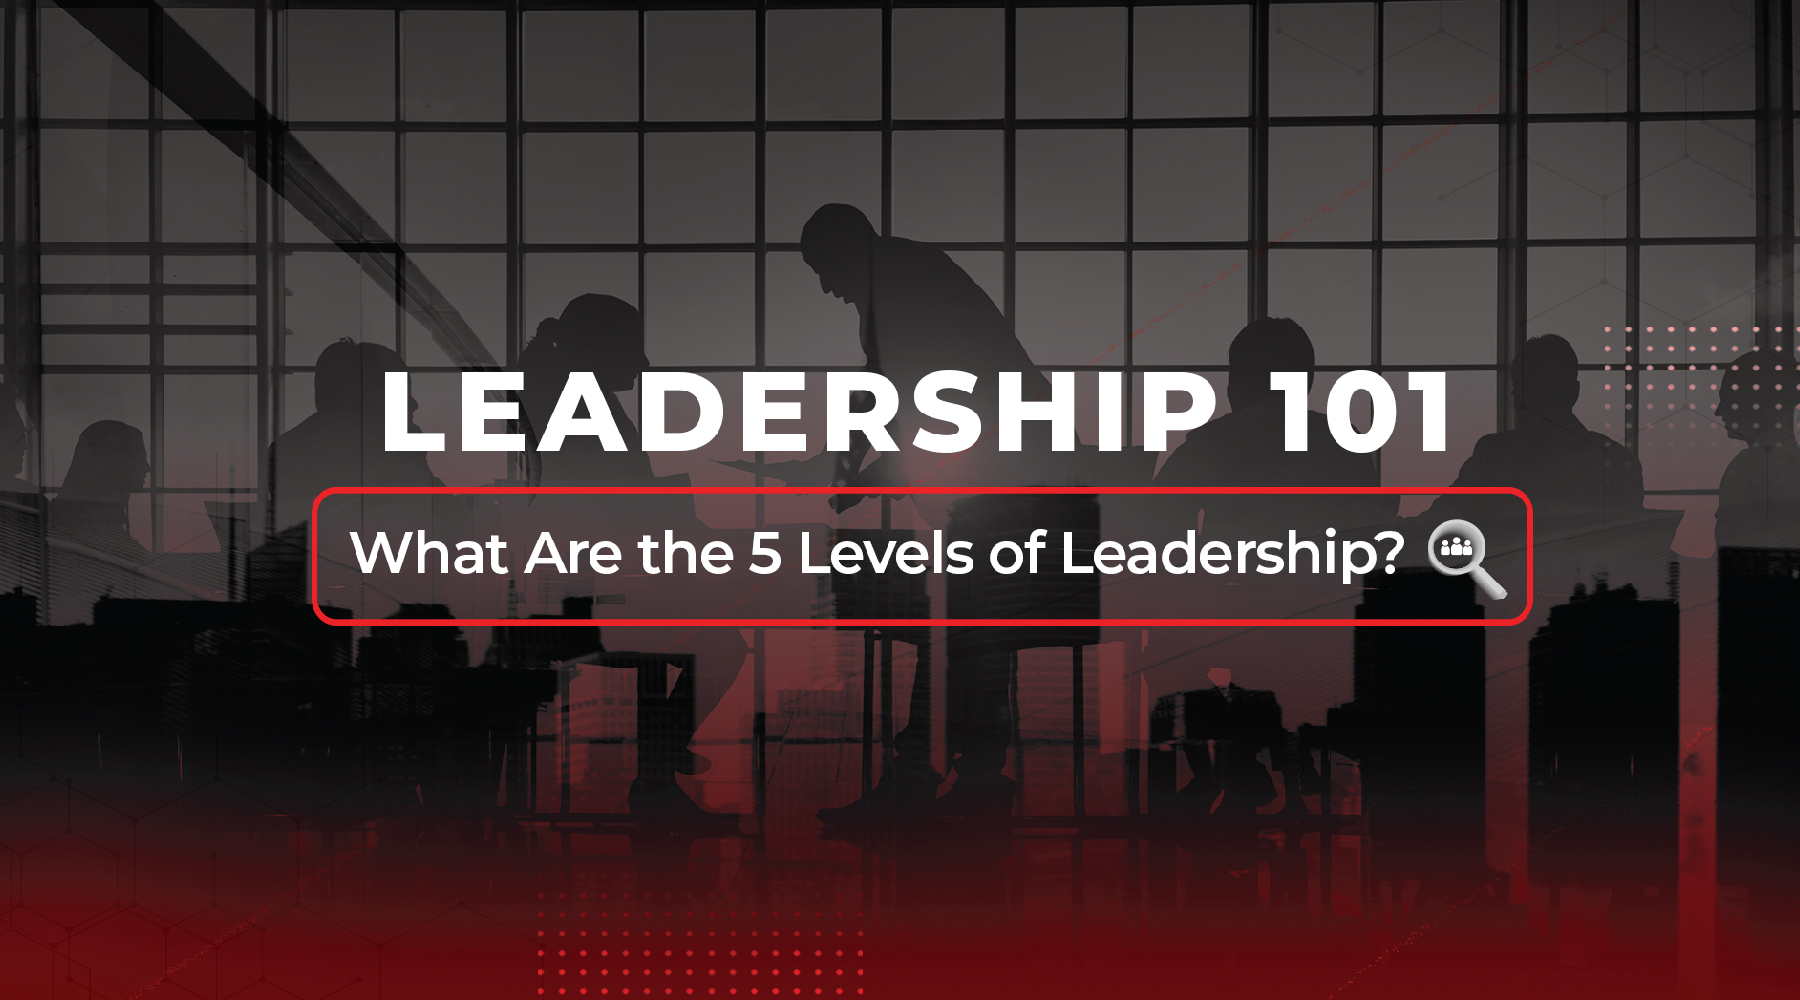 leadership 101 leadership entry level what are the 5 levels of leadership?